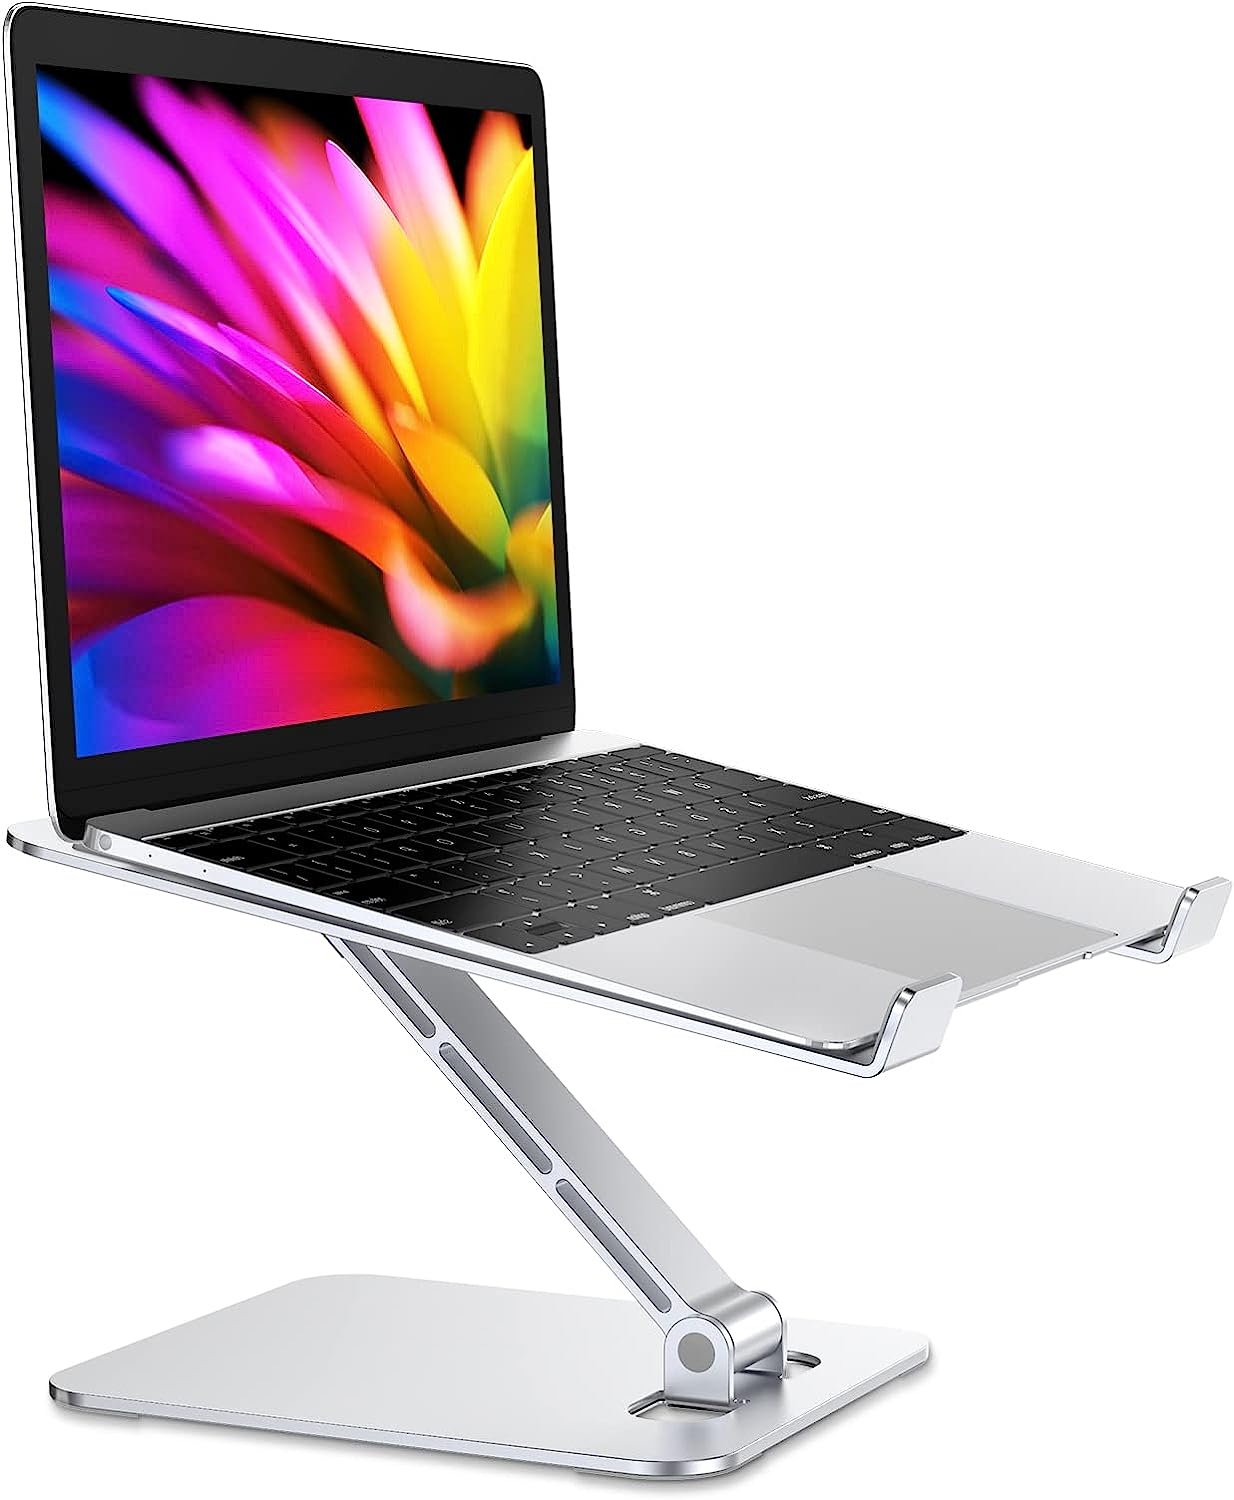 RIWUCT Foldable Laptop Stand, Height Adjustable [...]